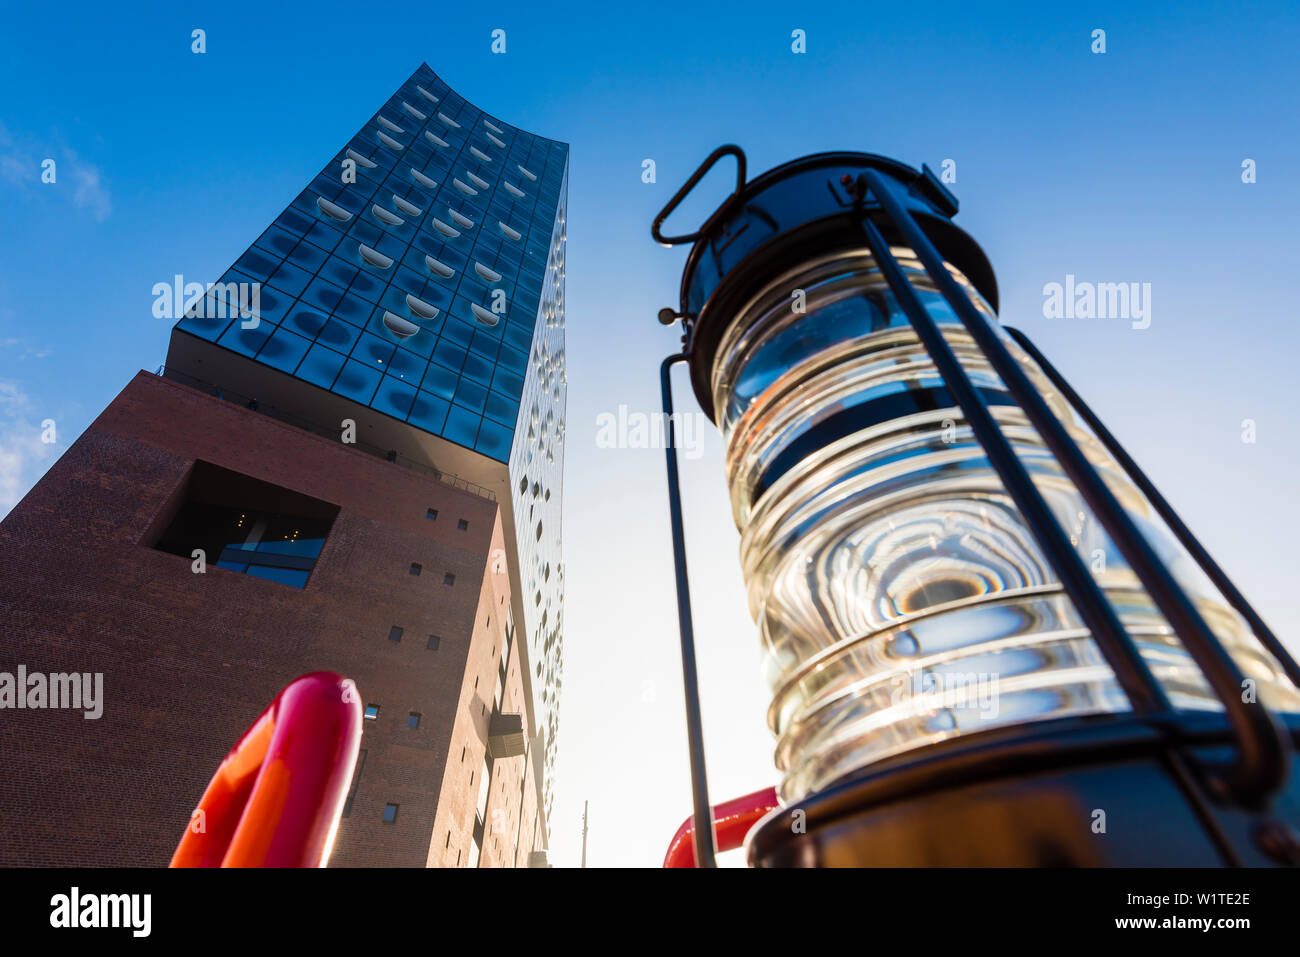 A navigation light in front of the Elbphilharmonie from a low-angle view, Hamburg, Germany Stock Photo